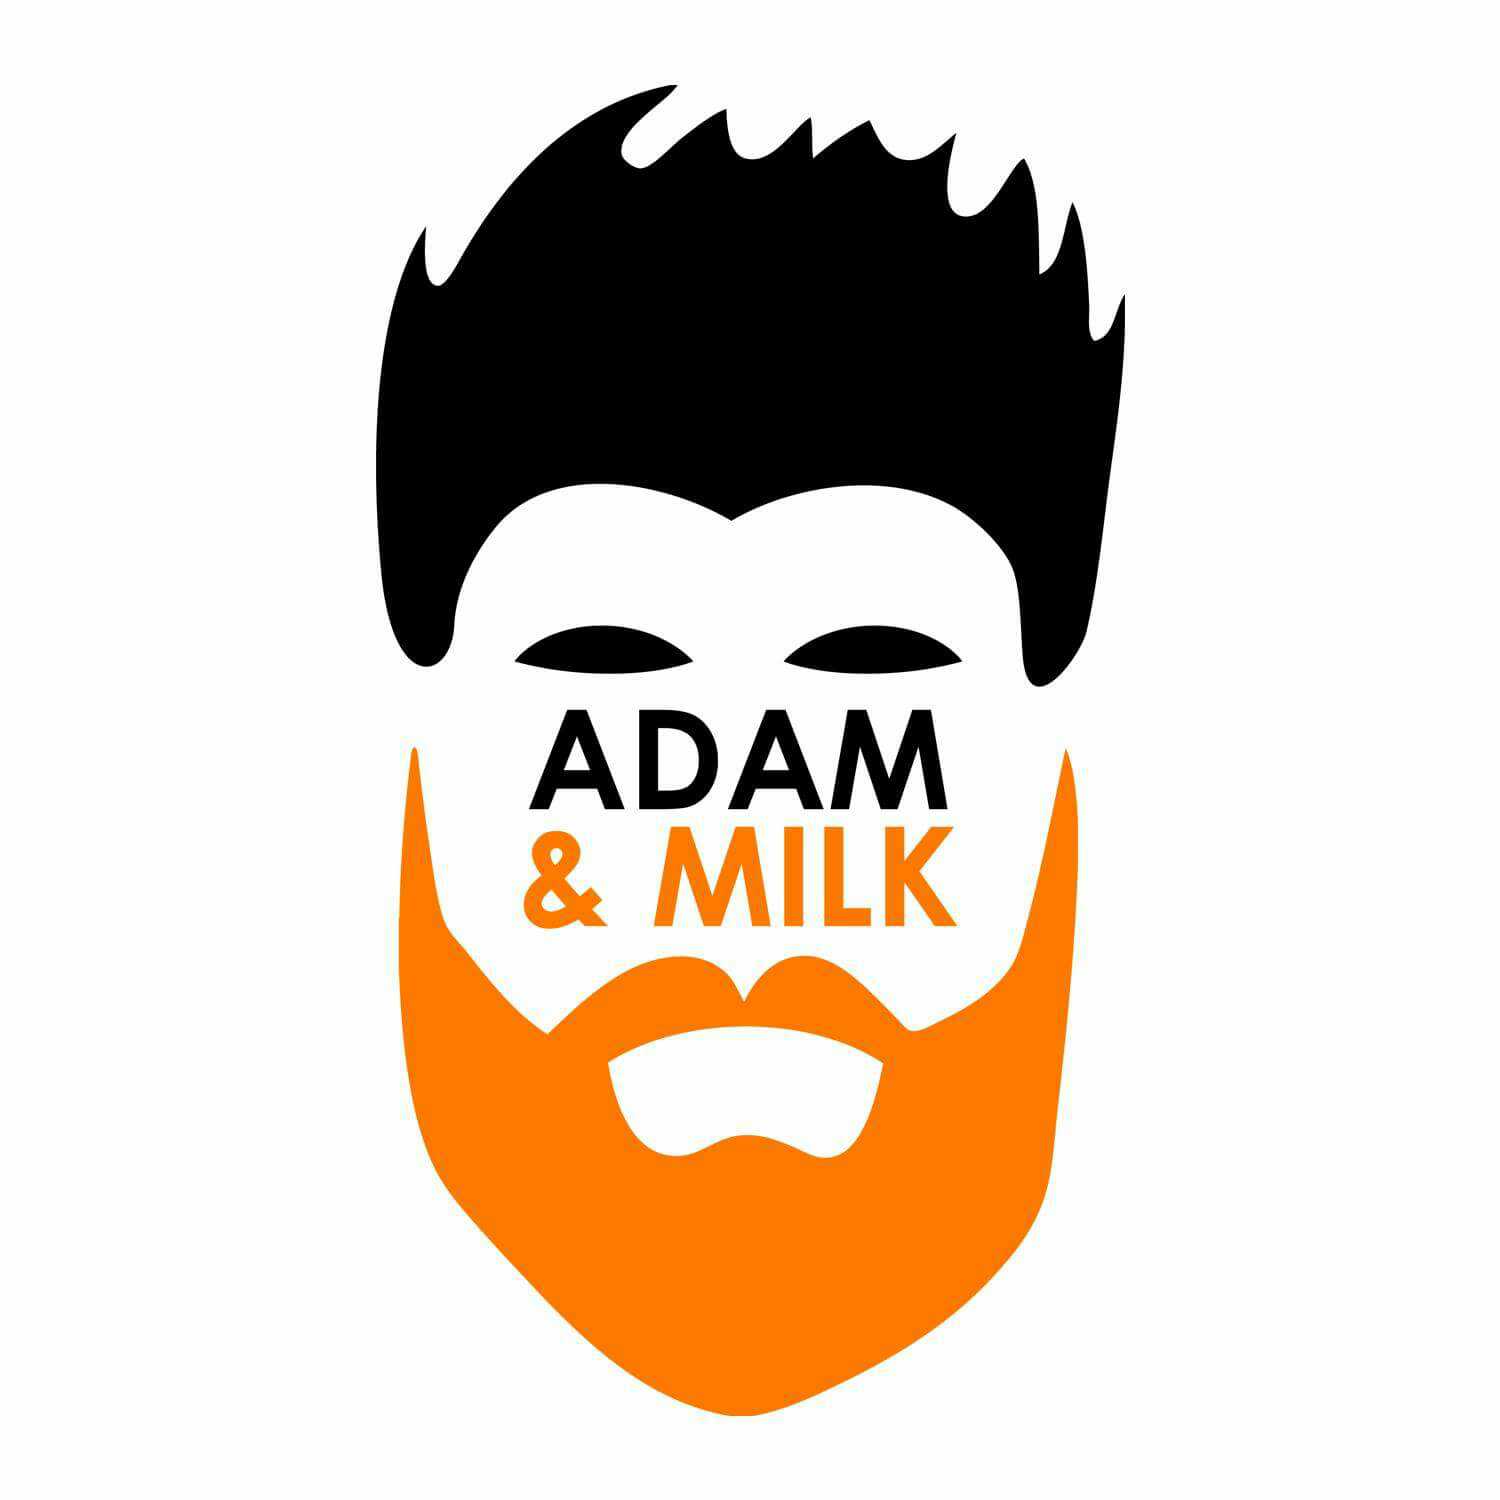 034 - Gone for loosies - Unpleasant with Adam and Milk